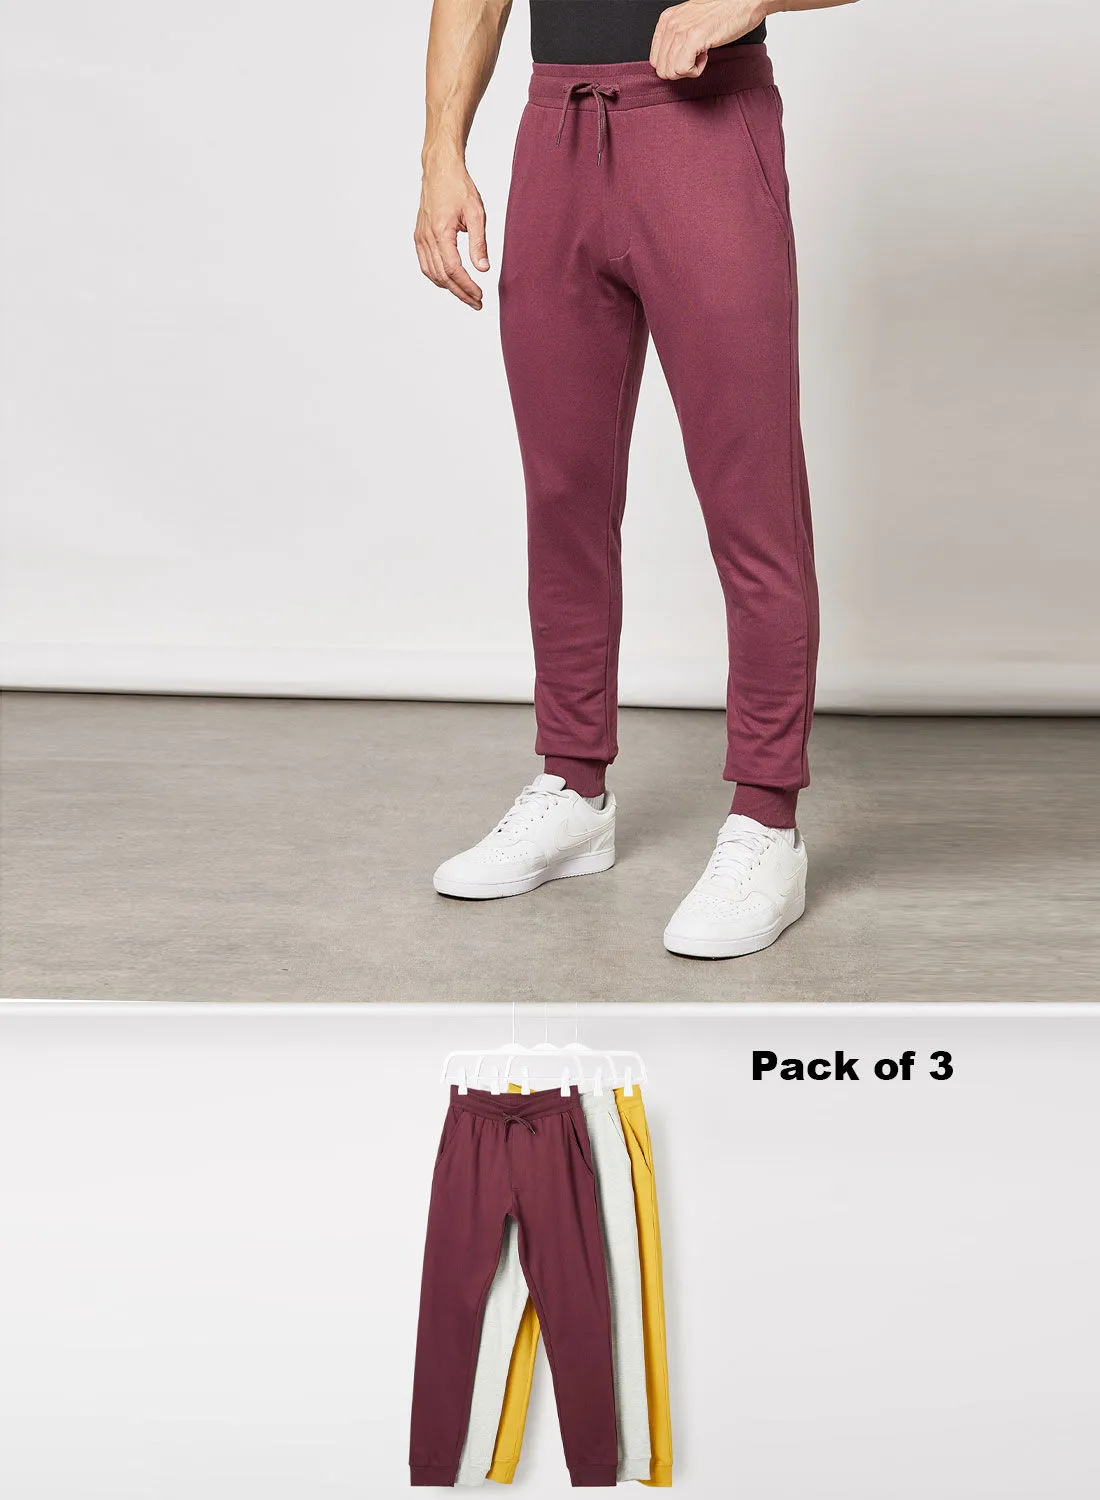 Noon East Men's 3 Pack Of Basic Casual Regular Fit Joggers With Side Pockets Grey Melange/Mineral Yellow/Maroon